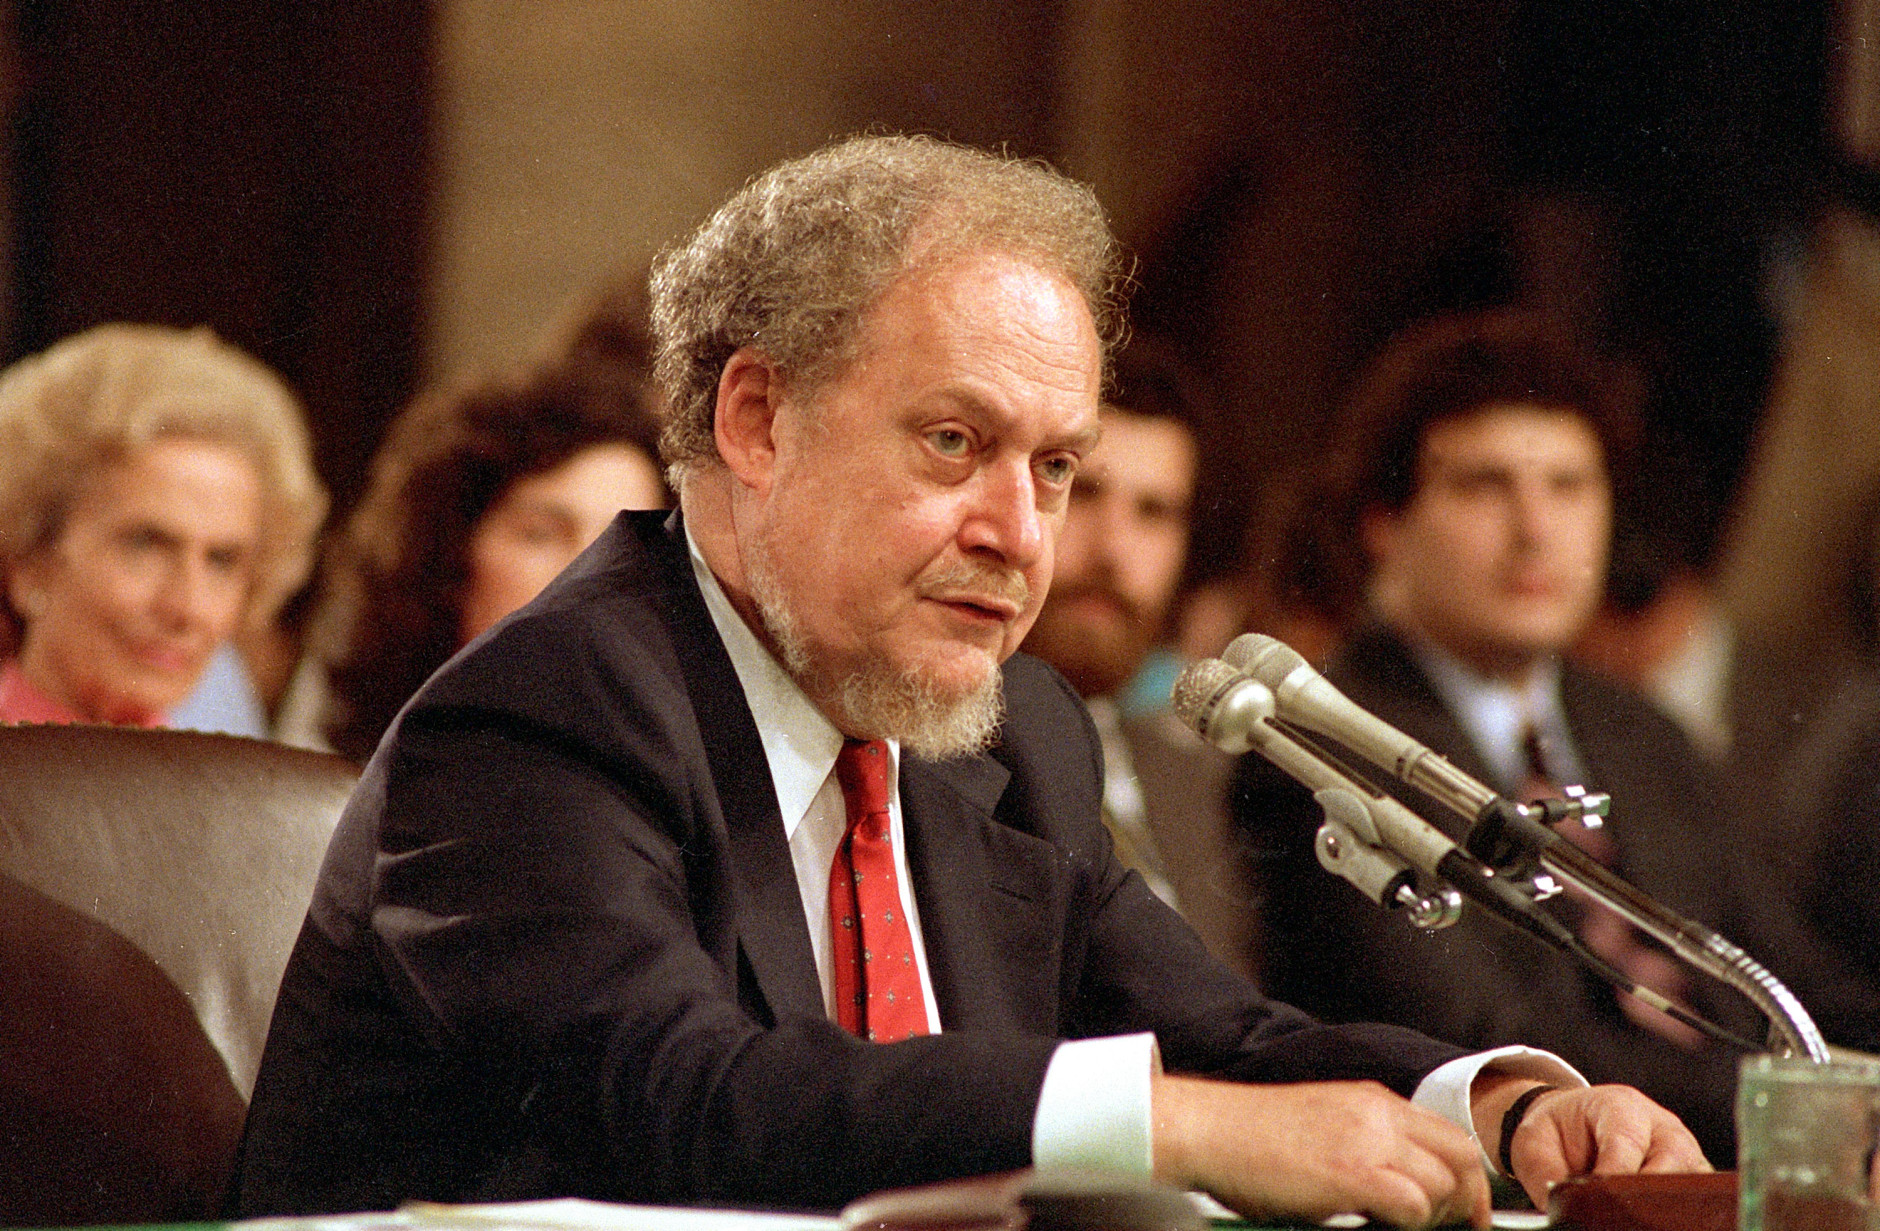 U.S. Supreme Court nominee Robert H. Bork testifies before the Senate Judiciary Committee on the first day of his confirmation hearings on Capitol Hill, Sept. 16, 1987.  Bork's message to the committee was that he was neither liberal nor conservative.  (AP Photo/Charles Tasnadi)